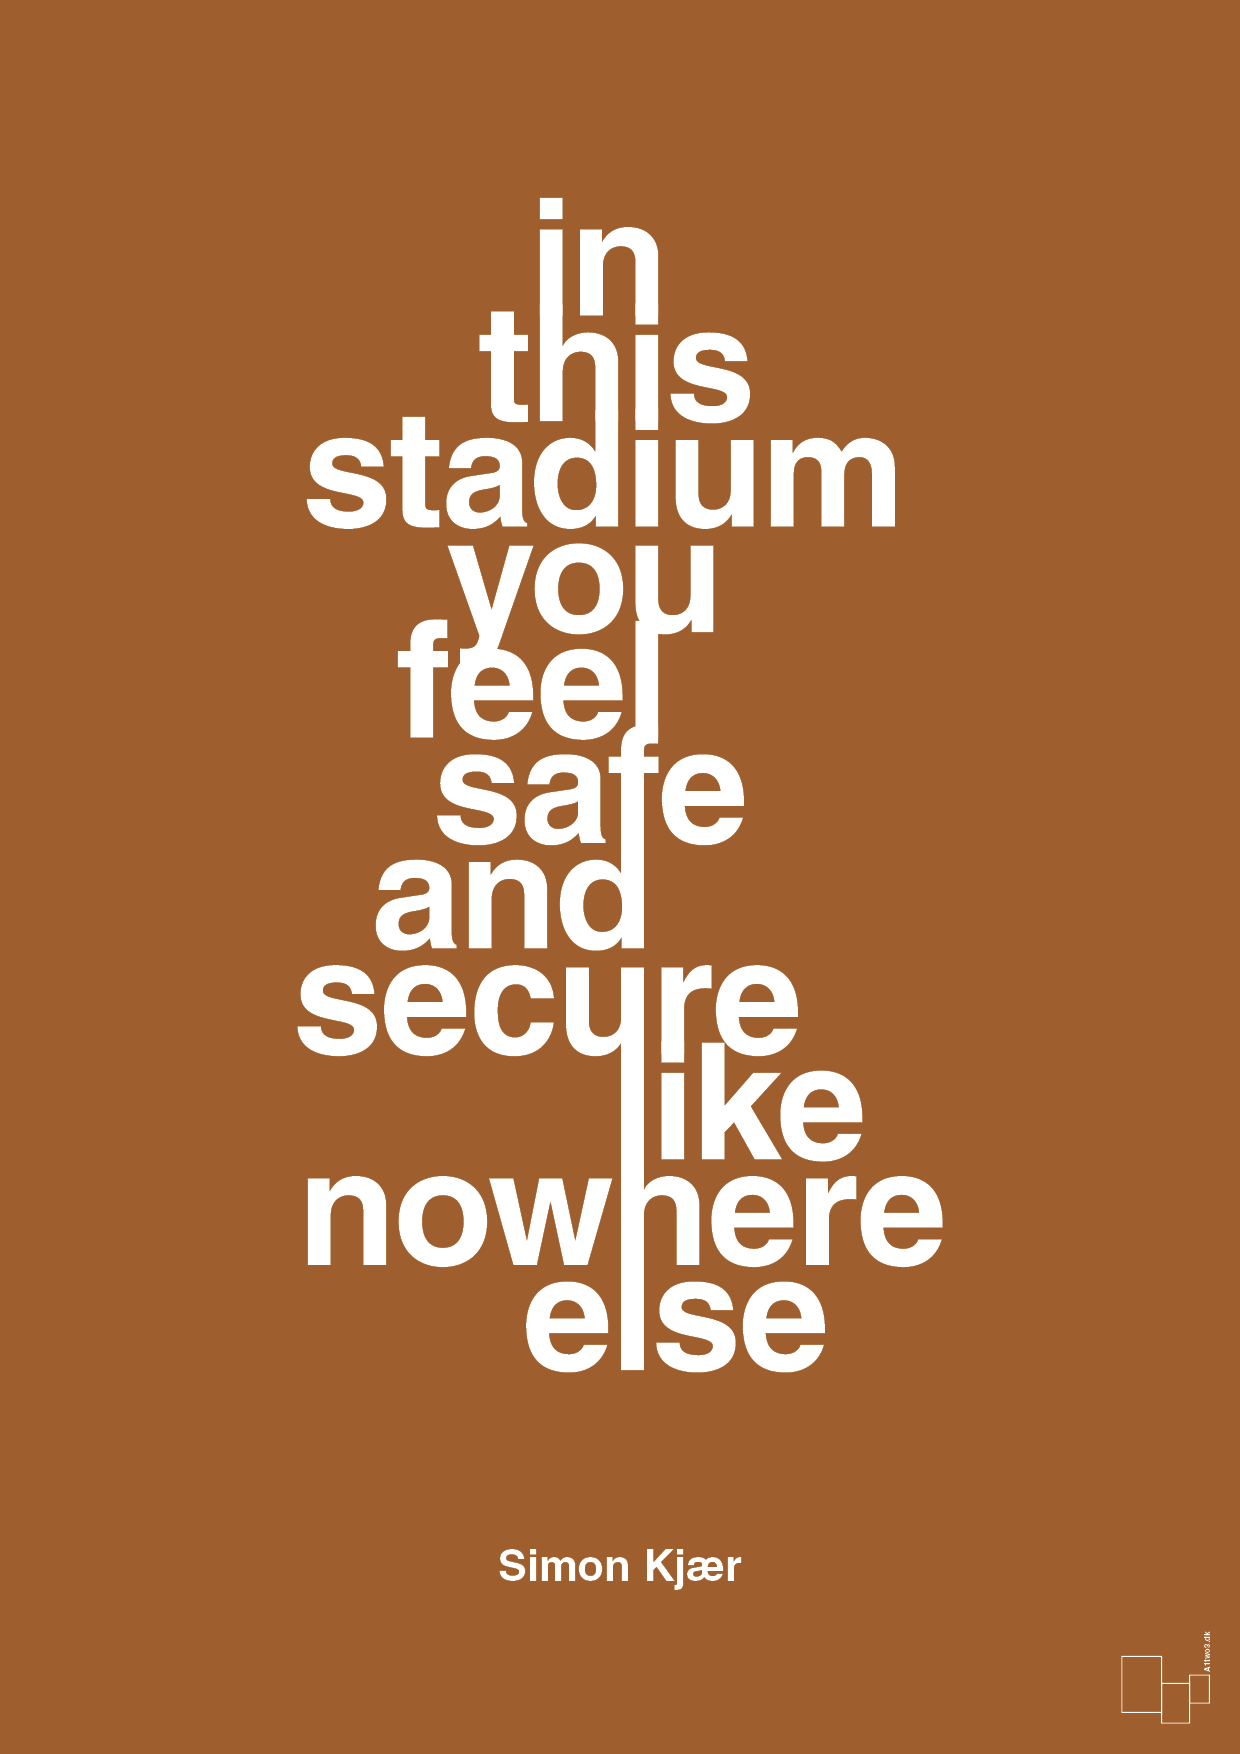 in this stadium you feel safe and secure like nowhere else - Plakat med Citater i Cognac